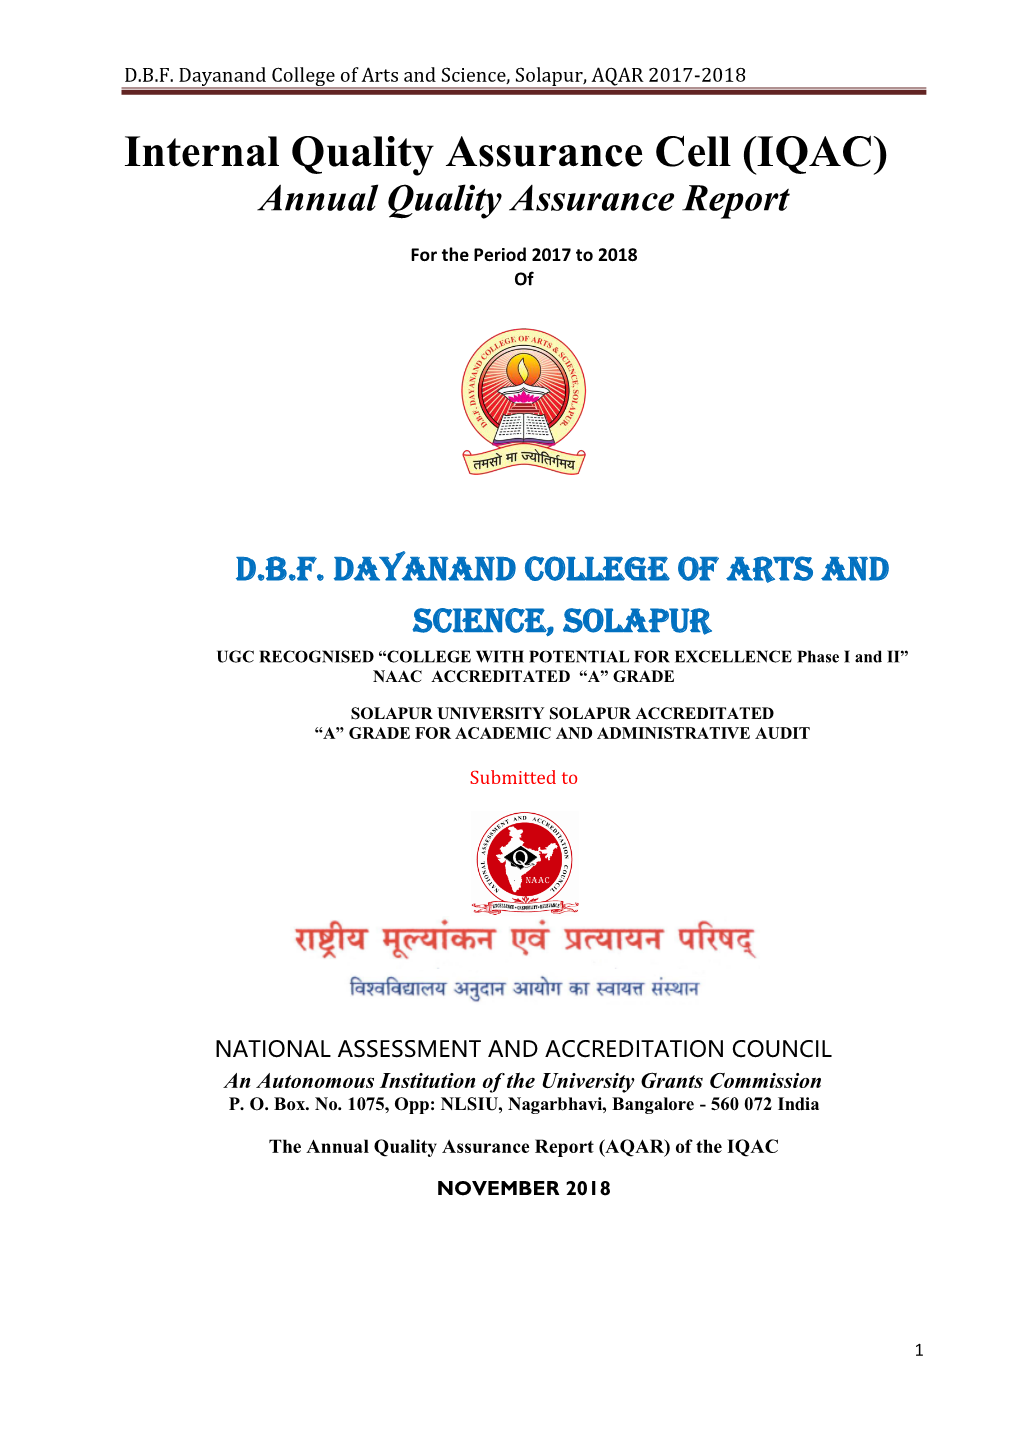 D.B.F. Dayanand College of Arts and Science, Solapur, AQAR 2017-2018